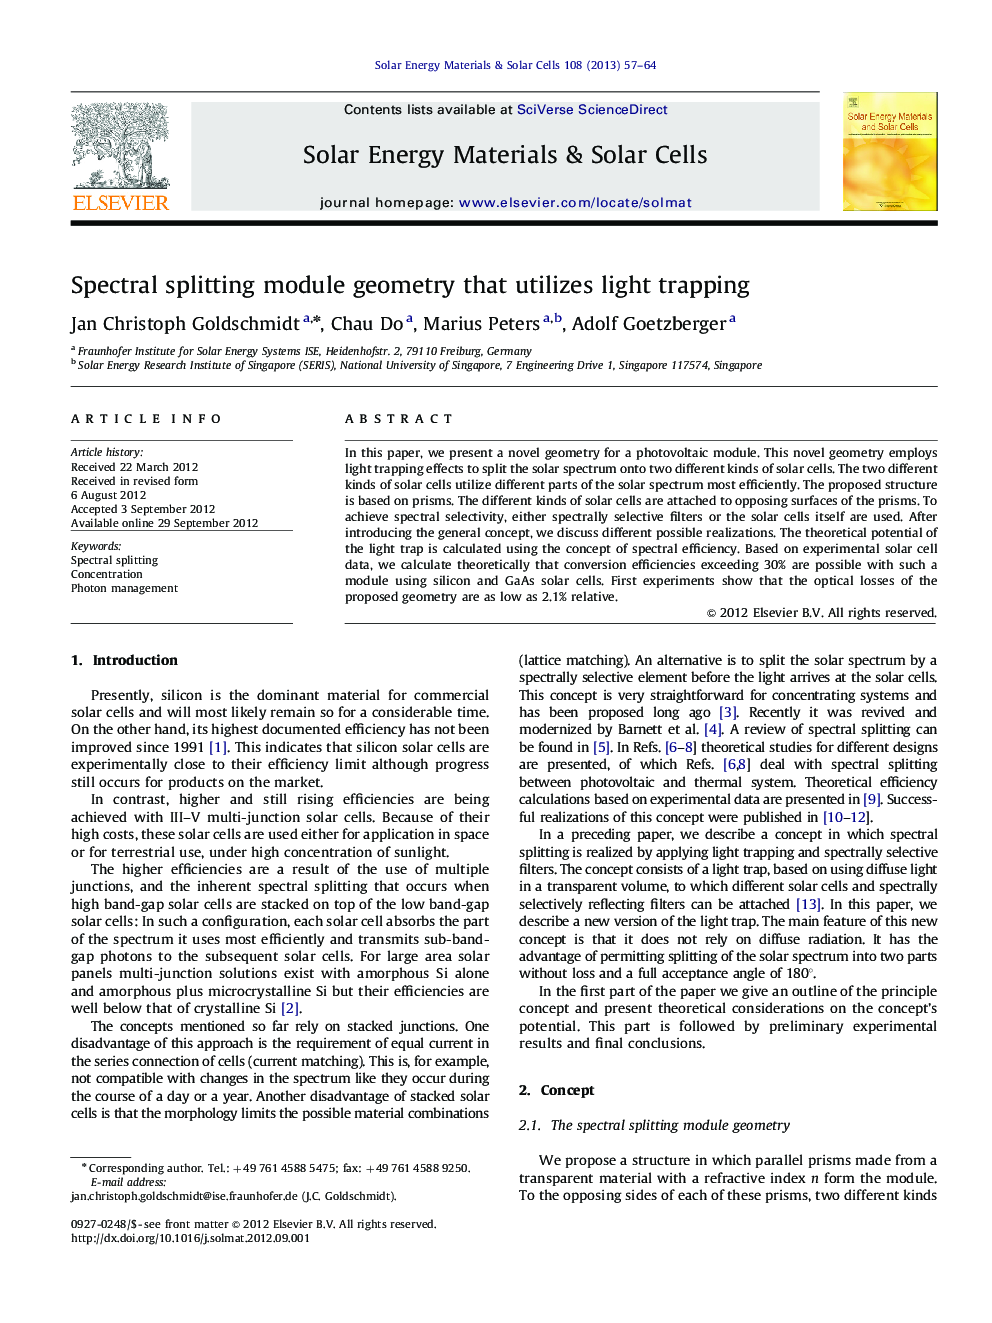 Spectral splitting module geometry that utilizes light trapping